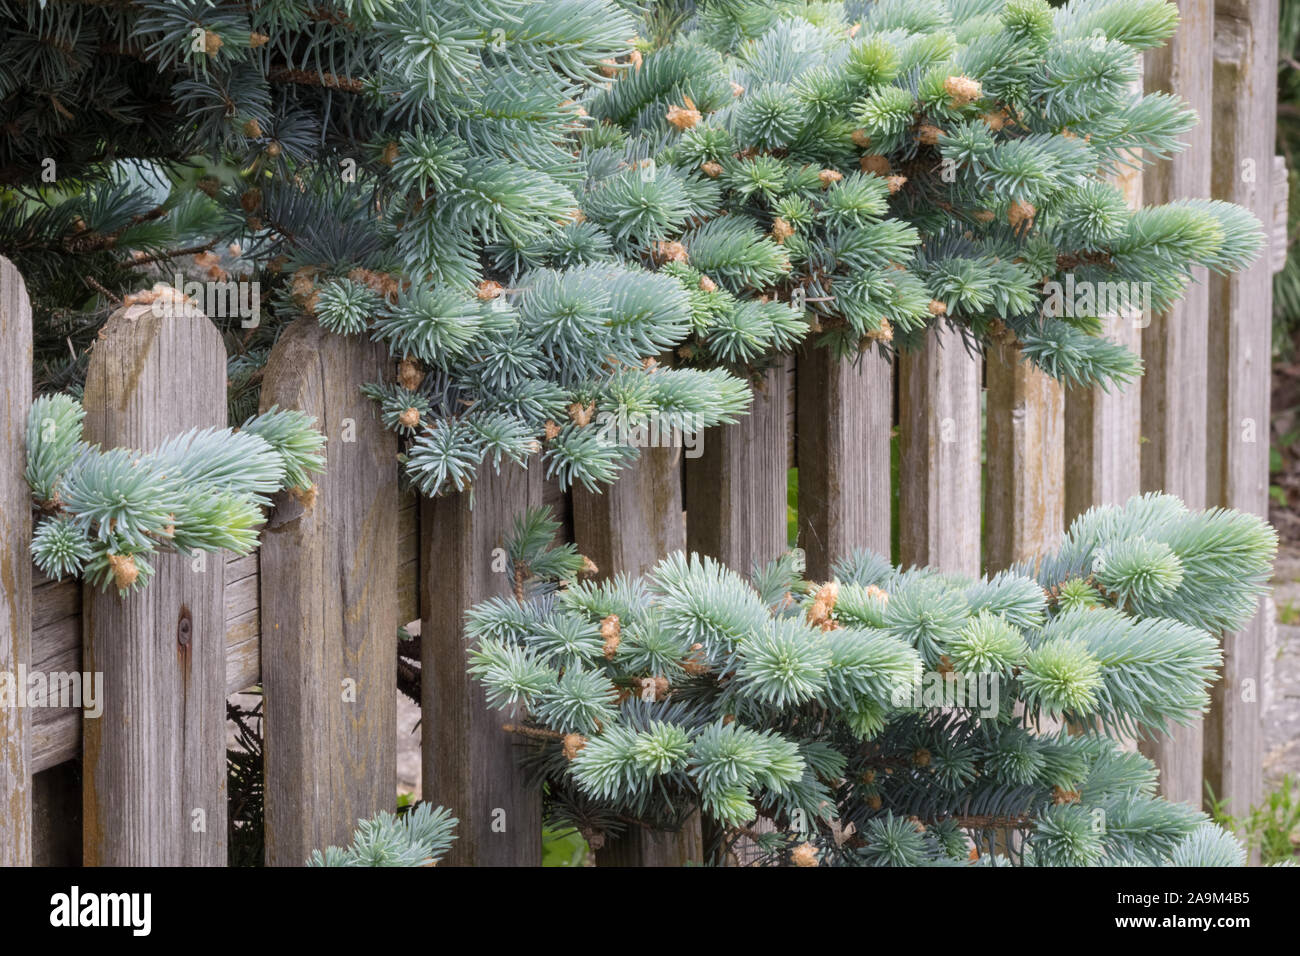 Close up of a spreading or creeping dwarf Colorado spruce (Picea pungens 'Glauca Prostrata' ) growing through a wooden fence in an urban garden Stock Photo